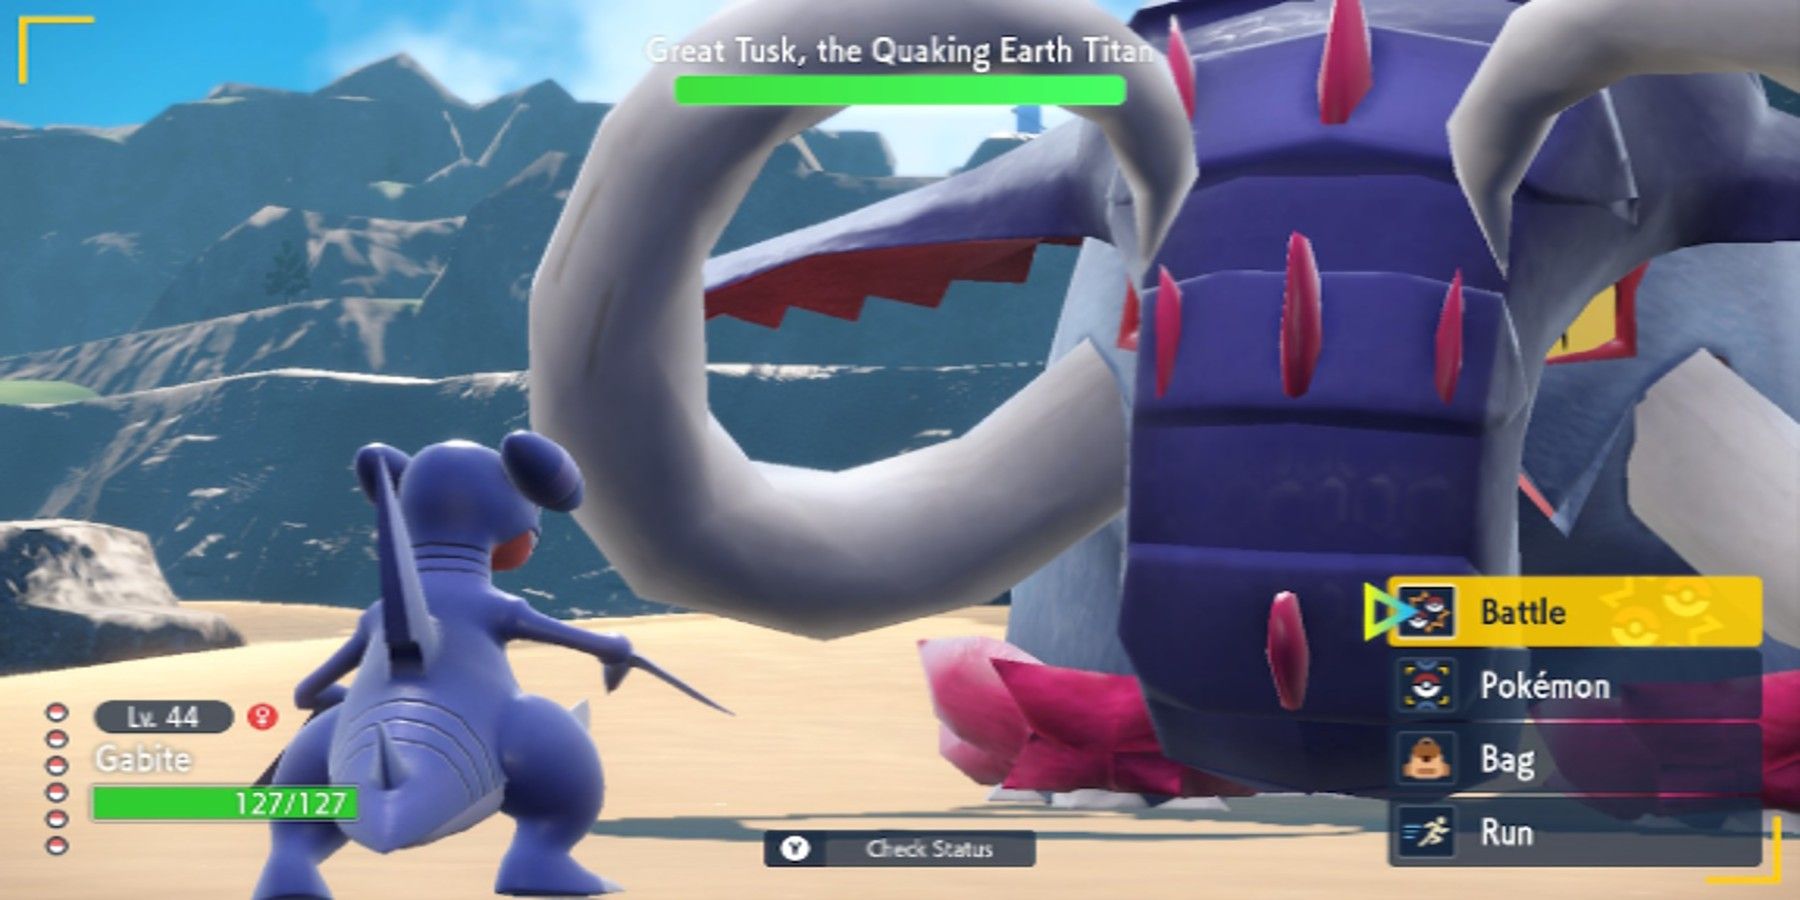 Pokemon Scarlet Violet-Quaking Earth Titan featuring Great Tusk from Pokemon Scarlet